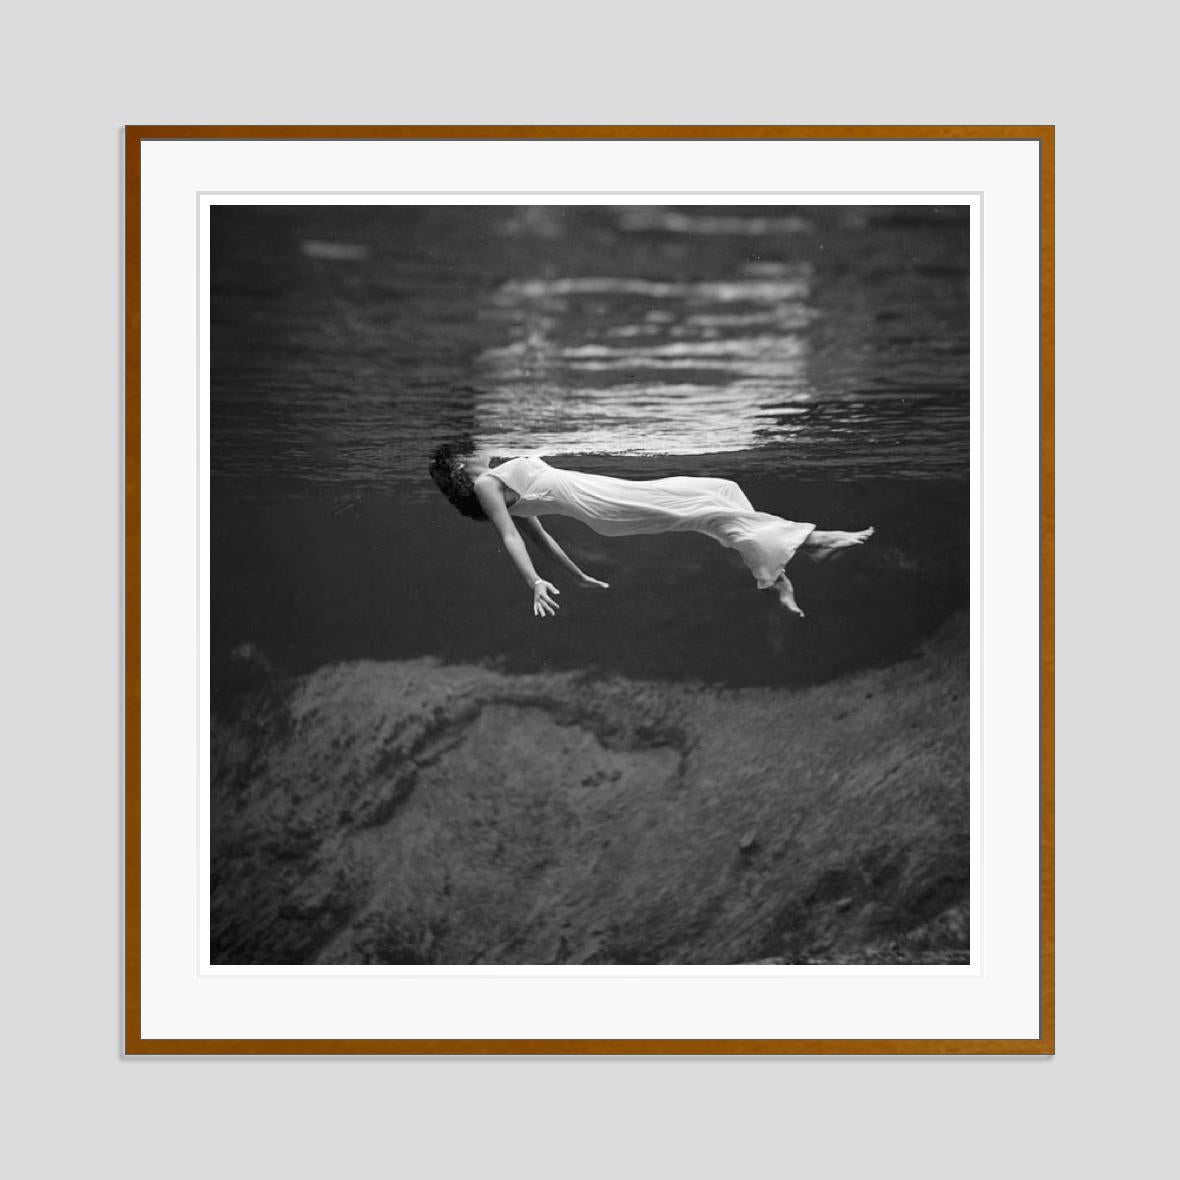 Floating 1947 Oversize Limited Signature Stamped Edition  - Photograph by Toni Frissell